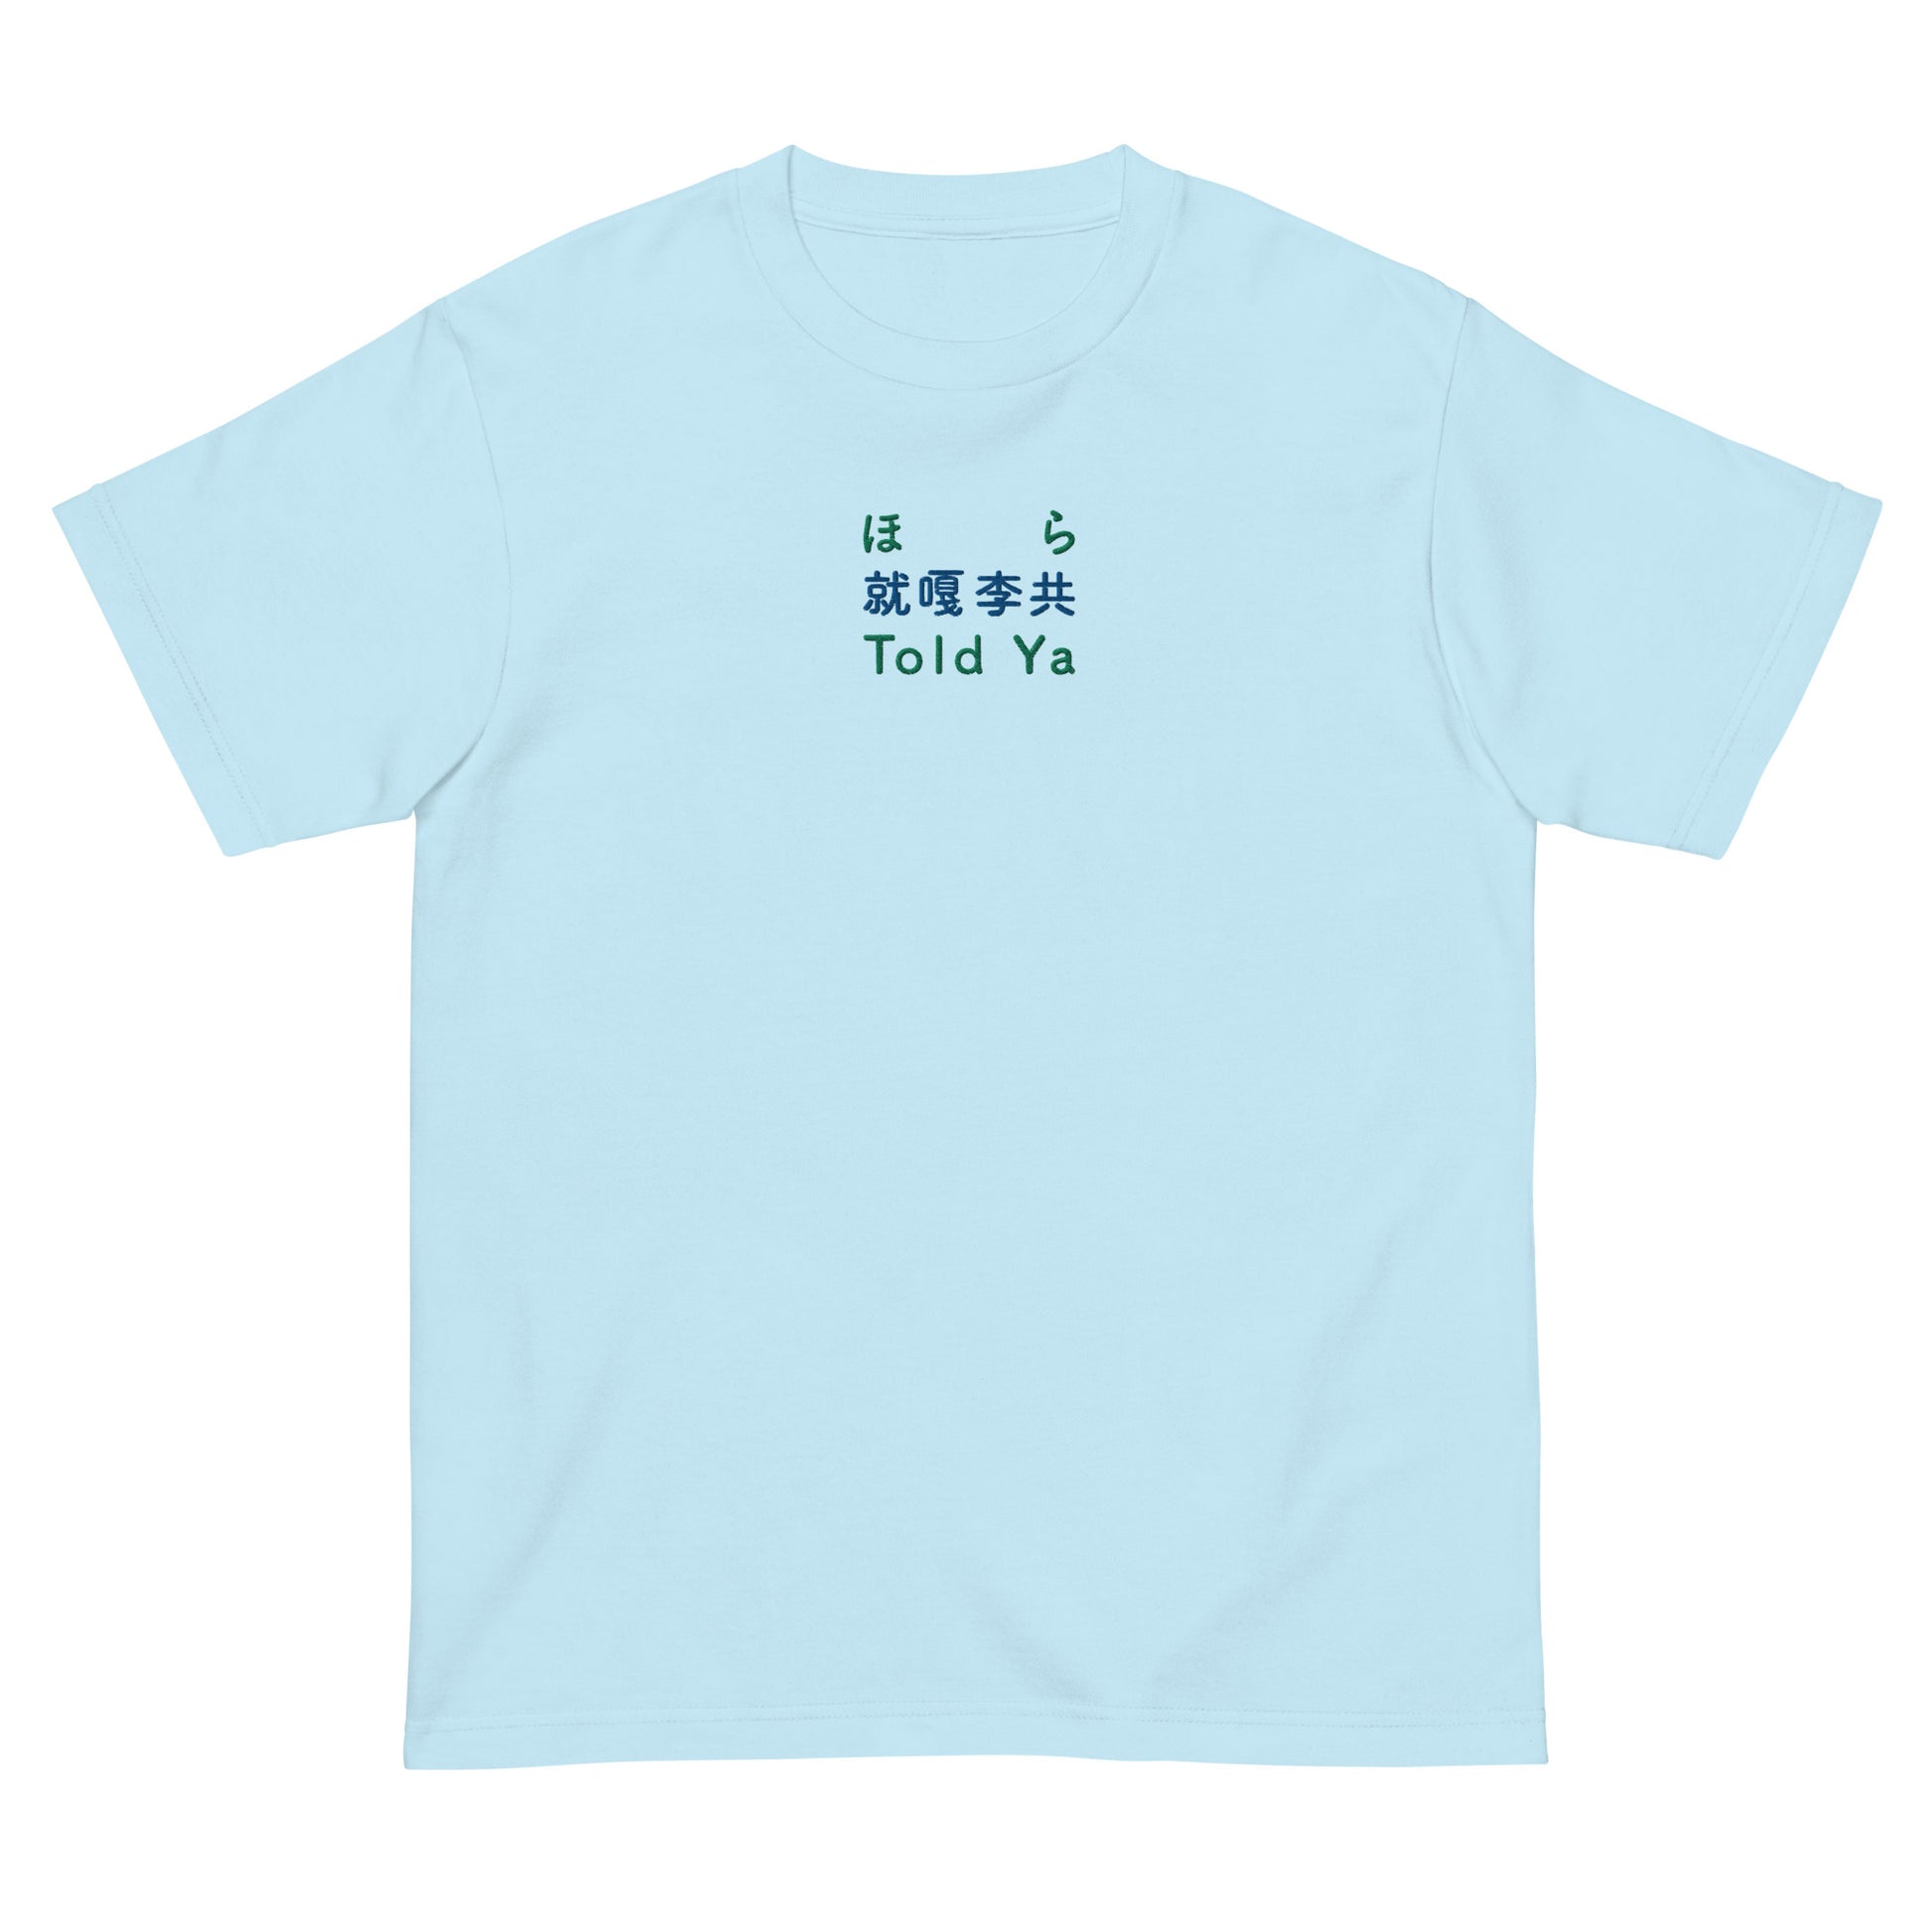 Light Blue High Quality Tee - Front Design with an Blue,Green Embroidery "Told Ya" in Japanese,Chinese and English